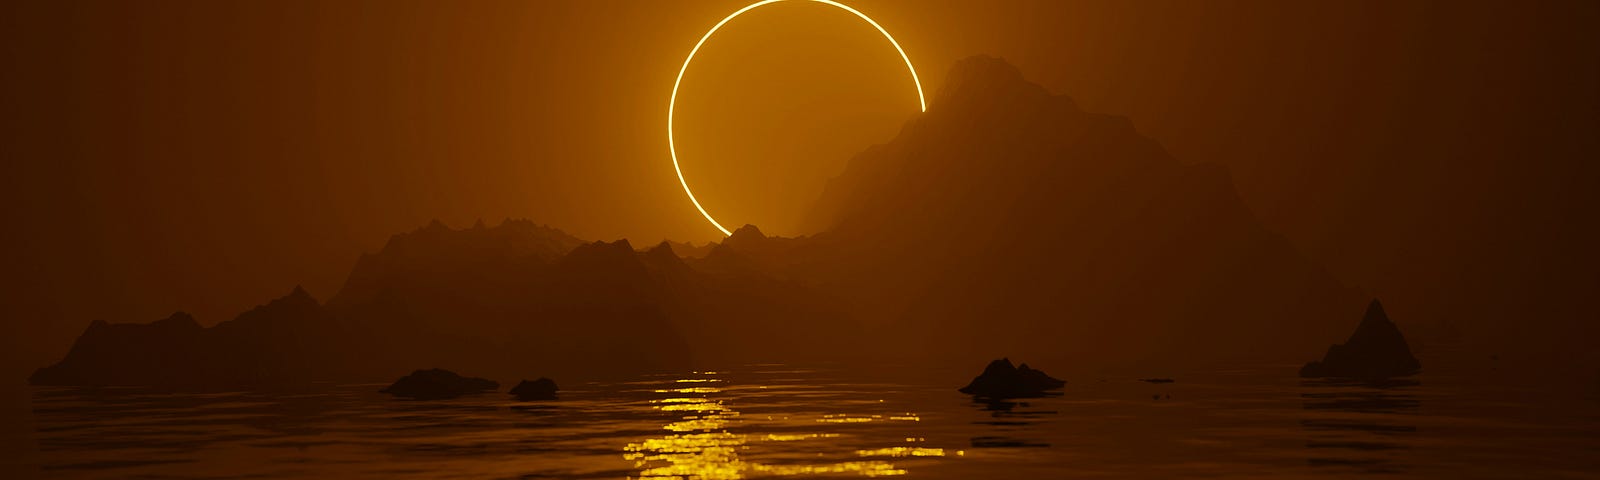 A sun in eclipse, rising behind a mountain and a body of water. The air is covered in a hazy, yellow mist.